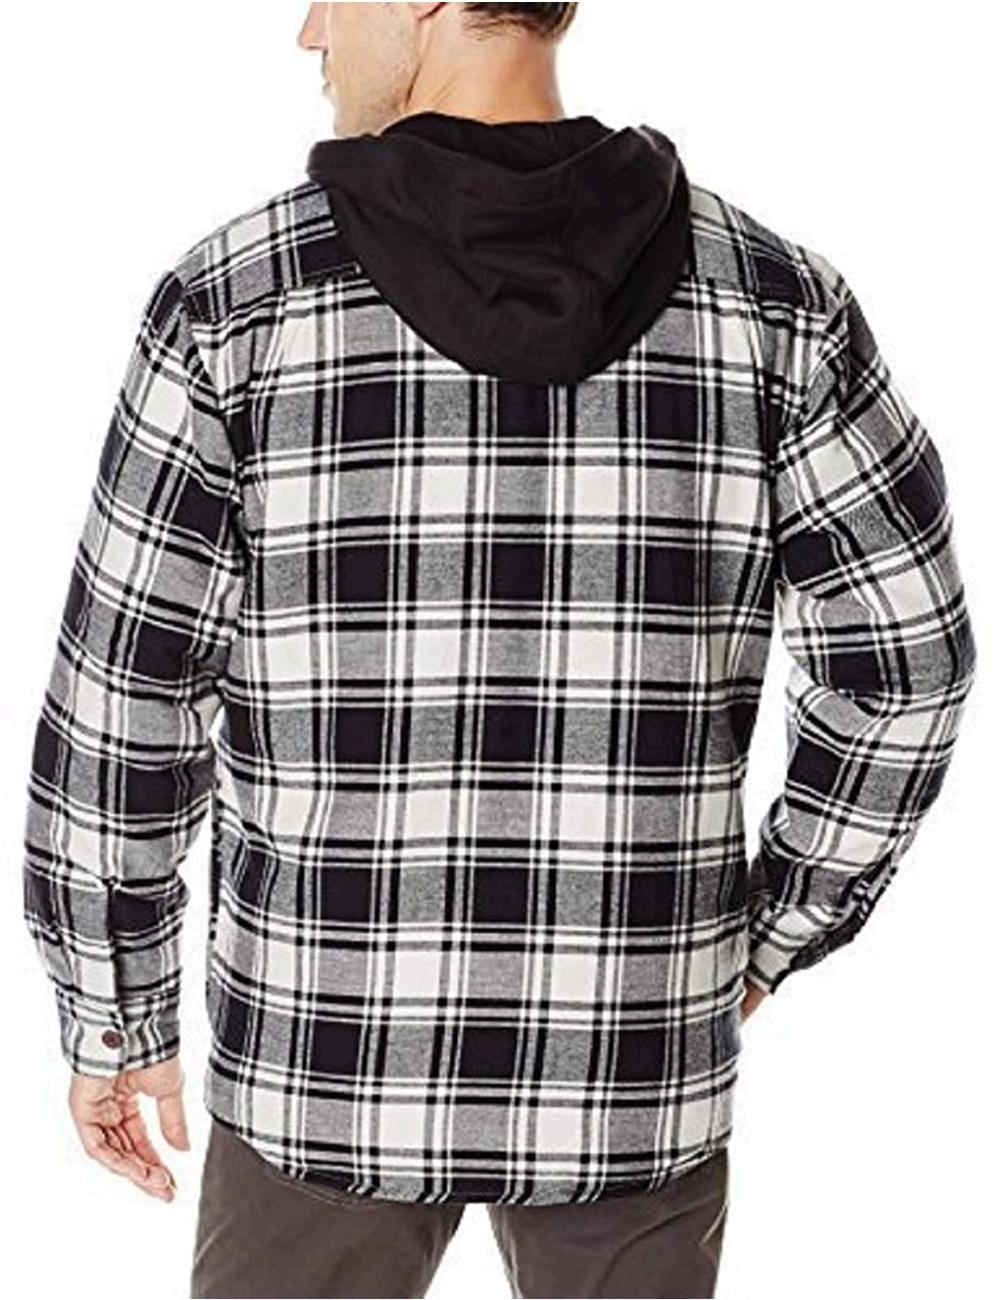 Wrangler Authentics Men's Long Sleeve Quilted Lined Flannel, Black ...